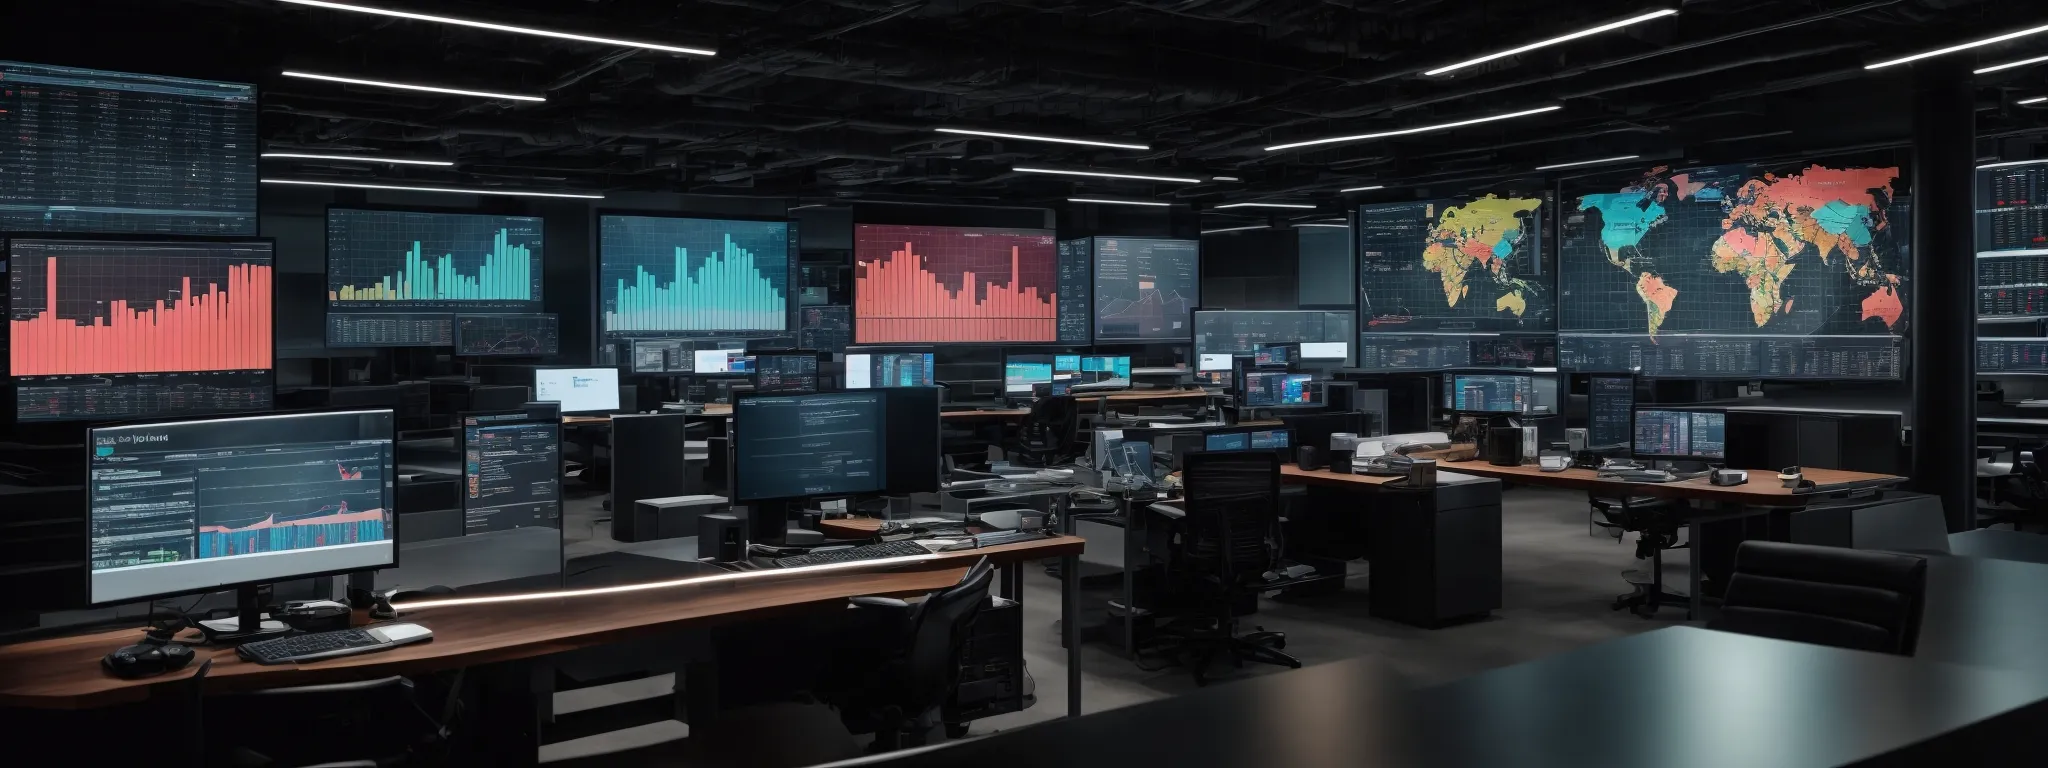 a sleek, modern office with multiple large screens displaying colorful graphs and data analytics dashboards.